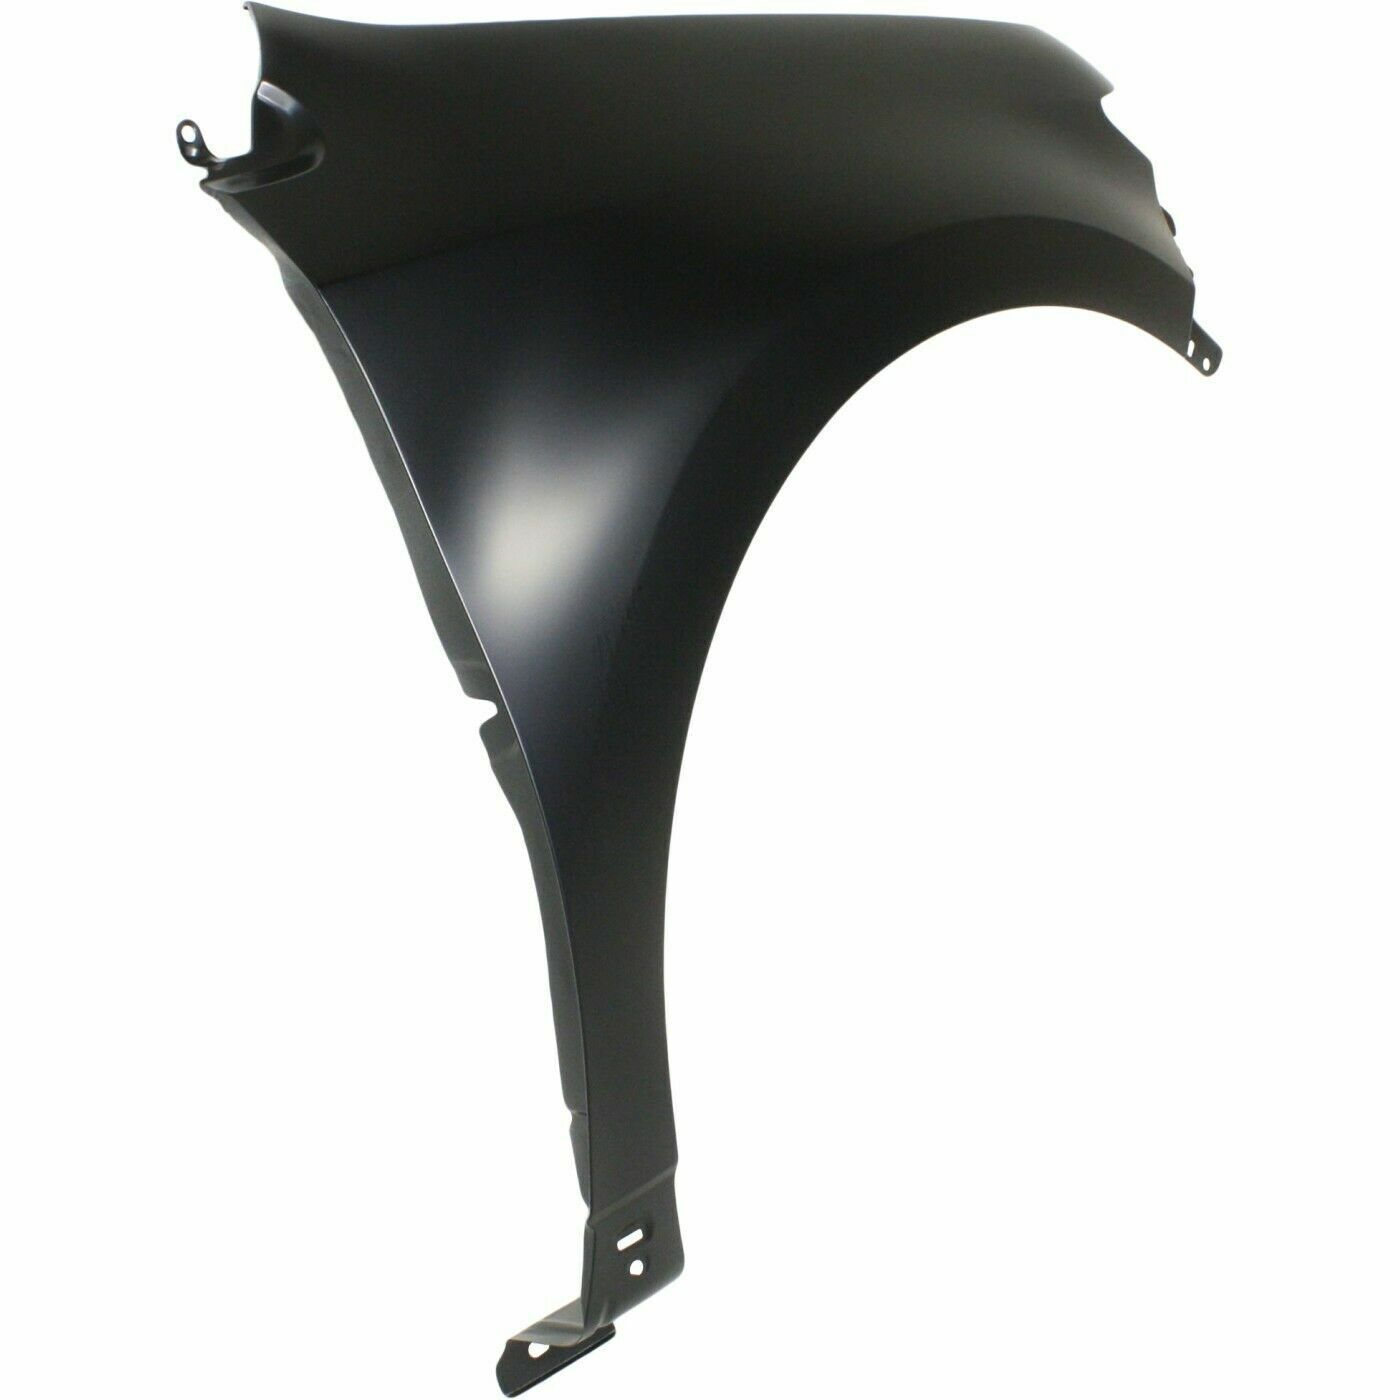 2007-2010 FORD EDGE; Right Fender; Painted to Match